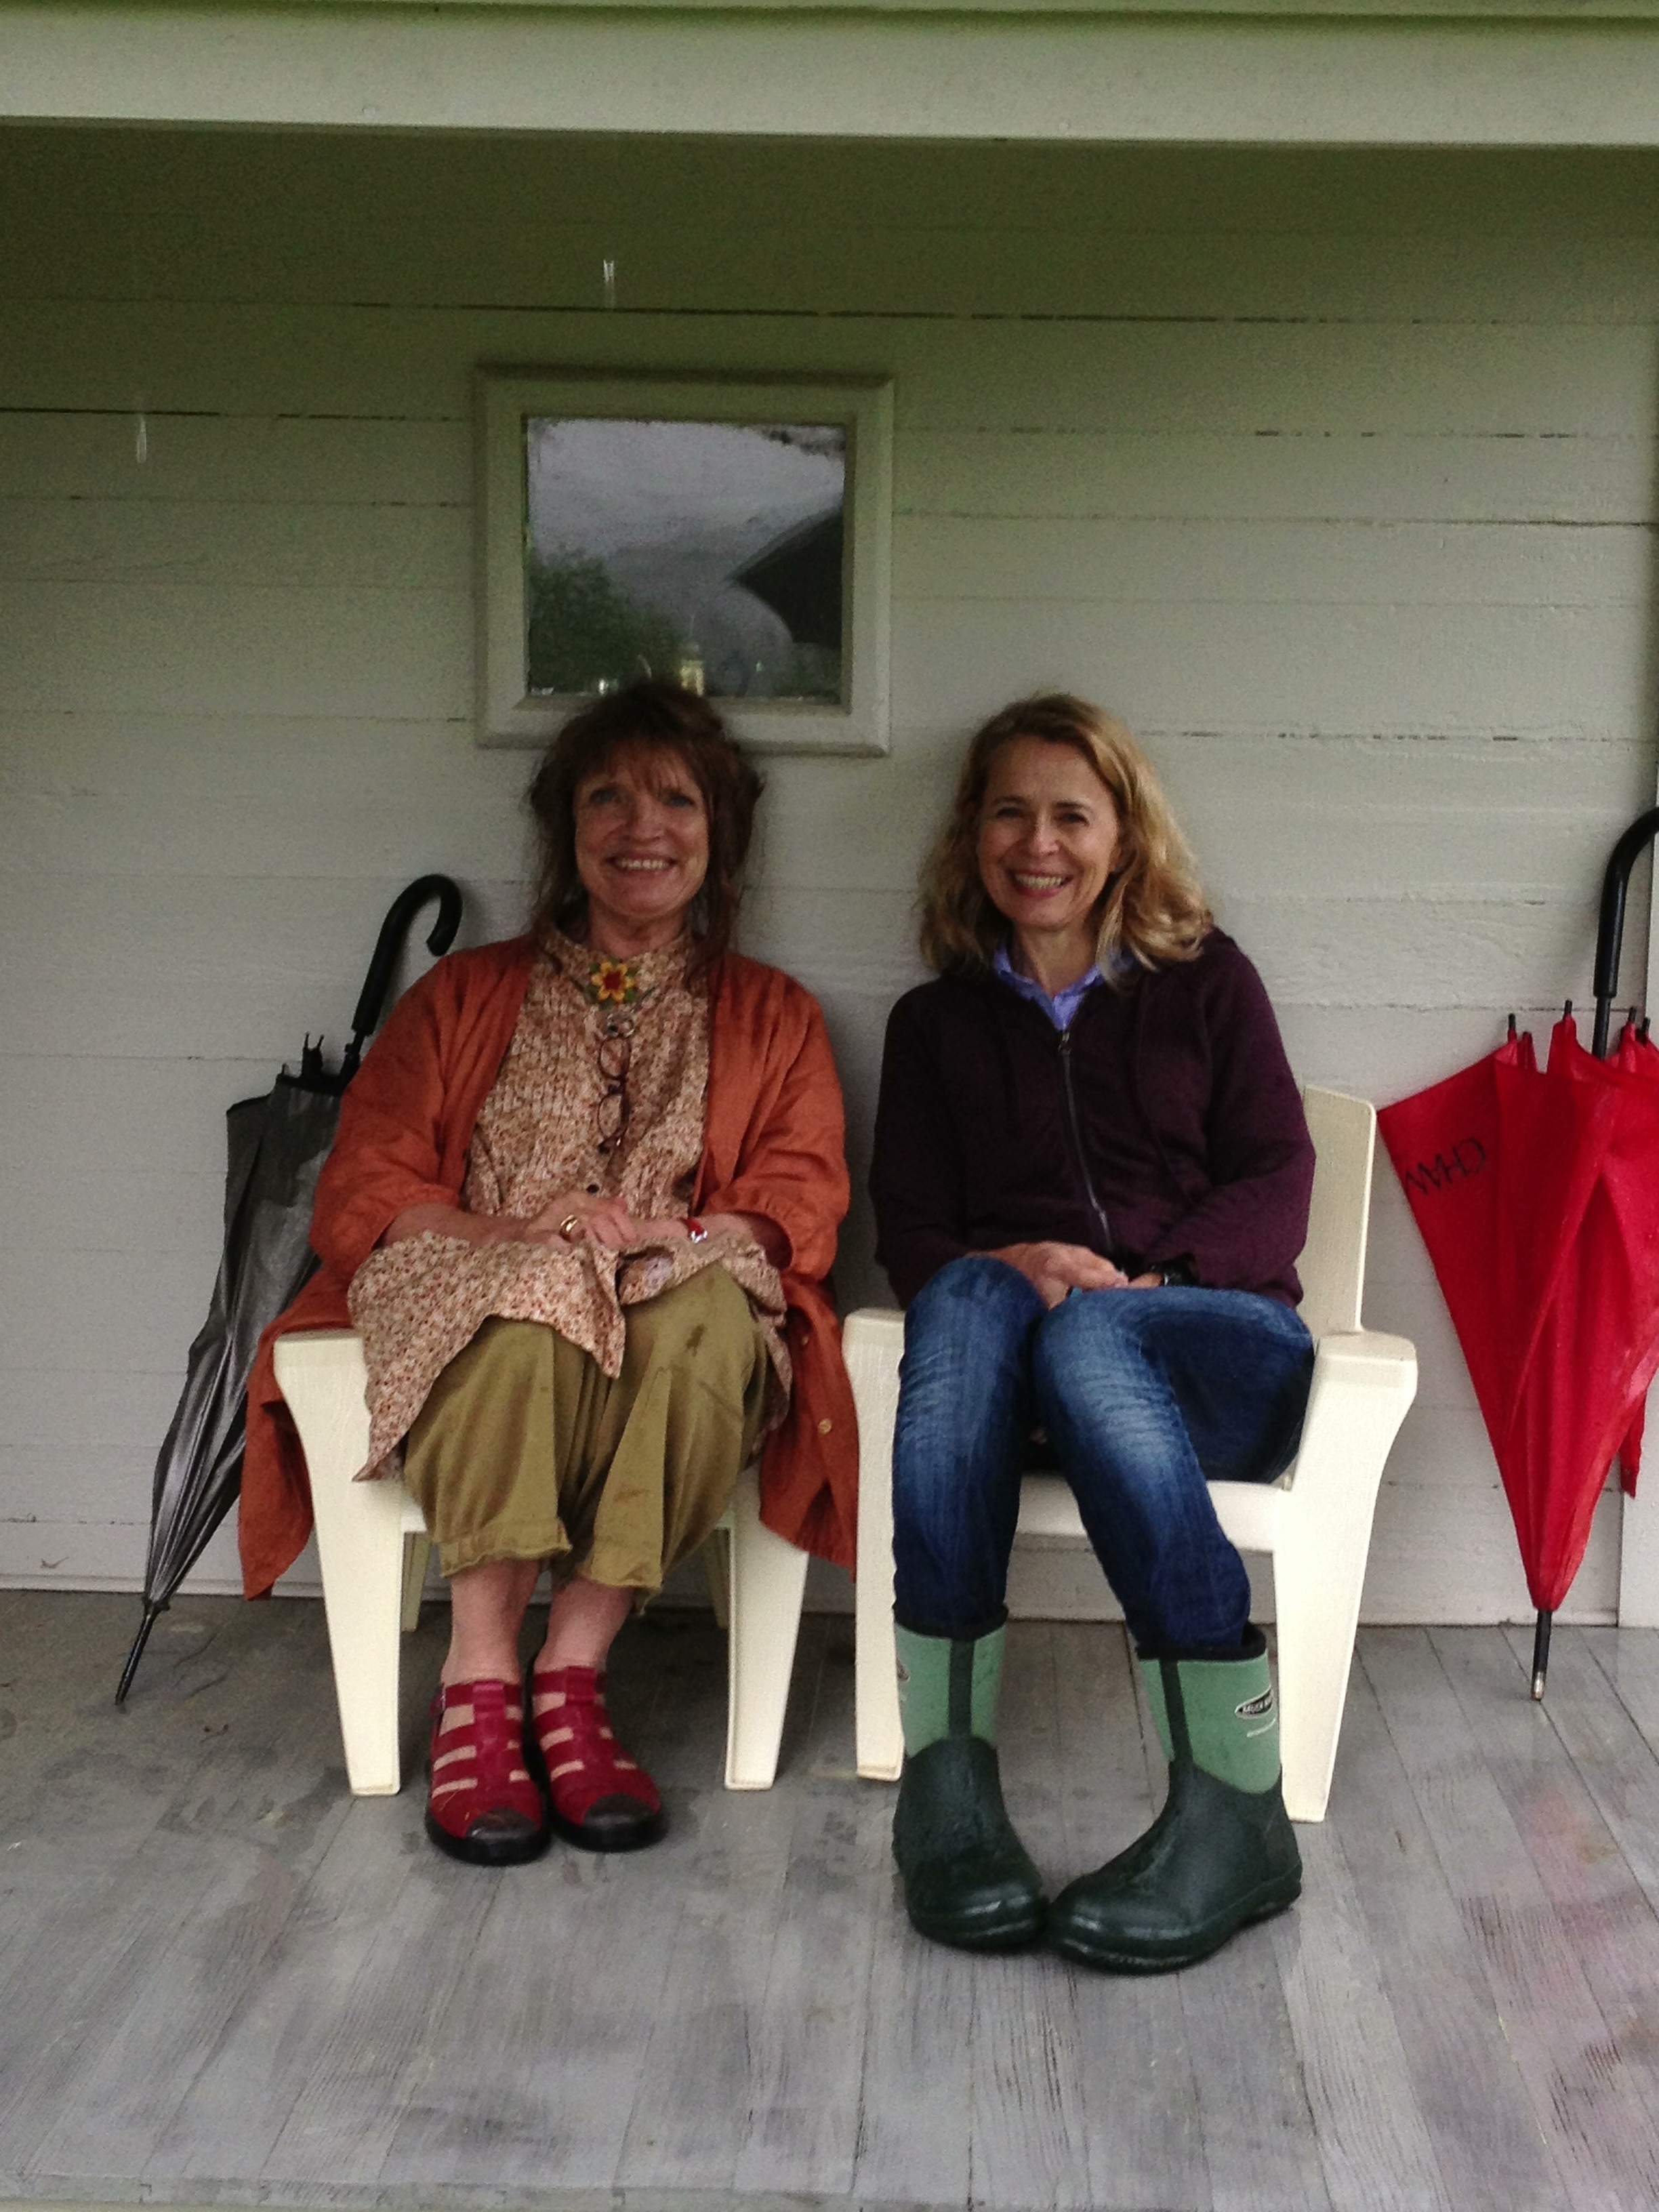 Jane and I sitting on the porch of the "mini house" they have on the farm